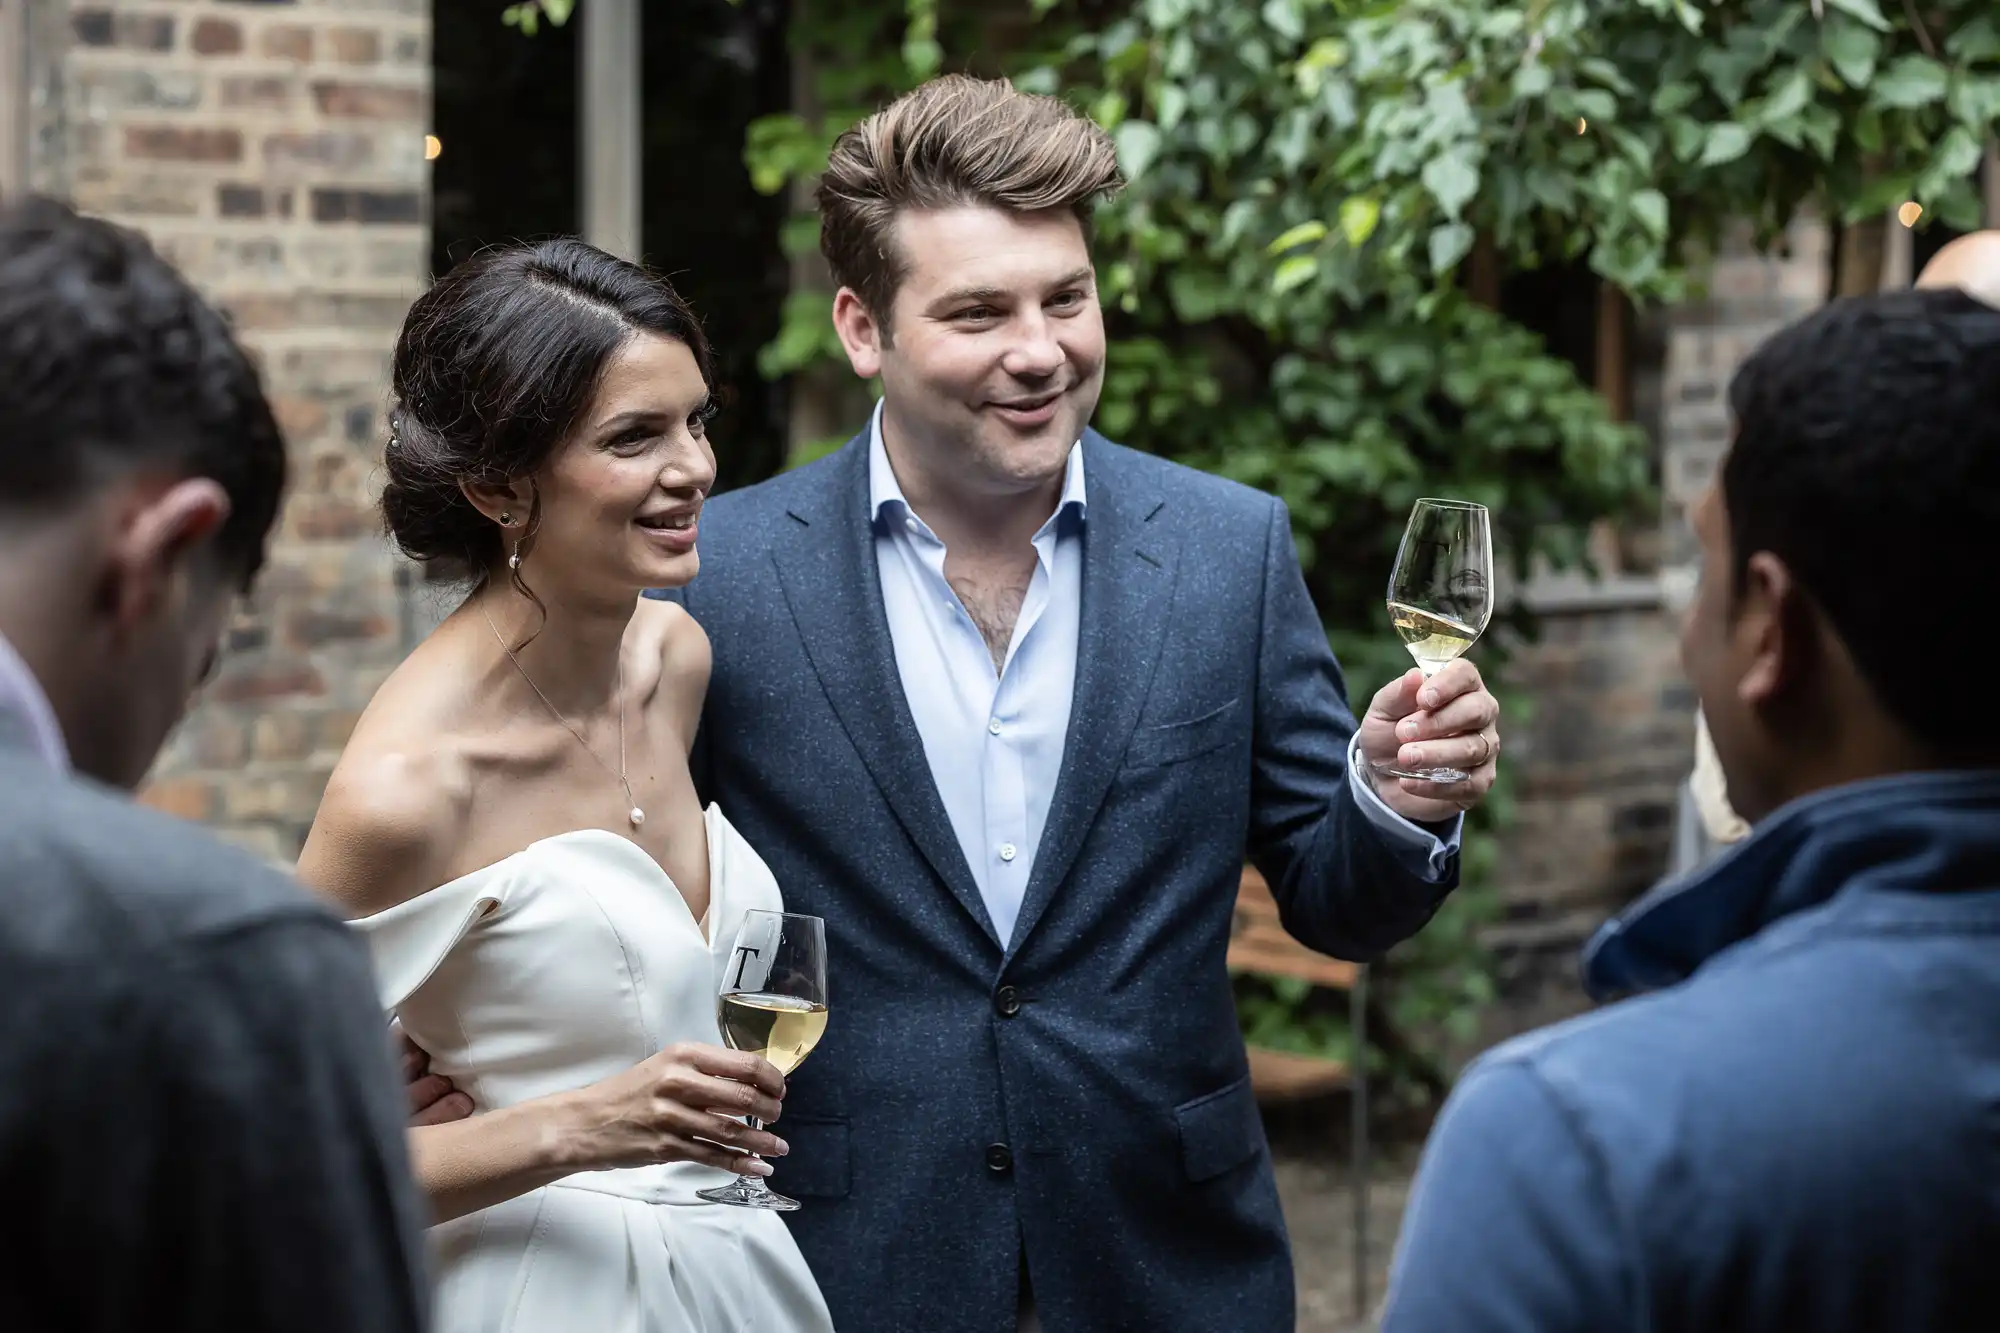 Bride and groom holding champagne glasses at a wedding reception, interacting happily with guests in an outdoor setting.